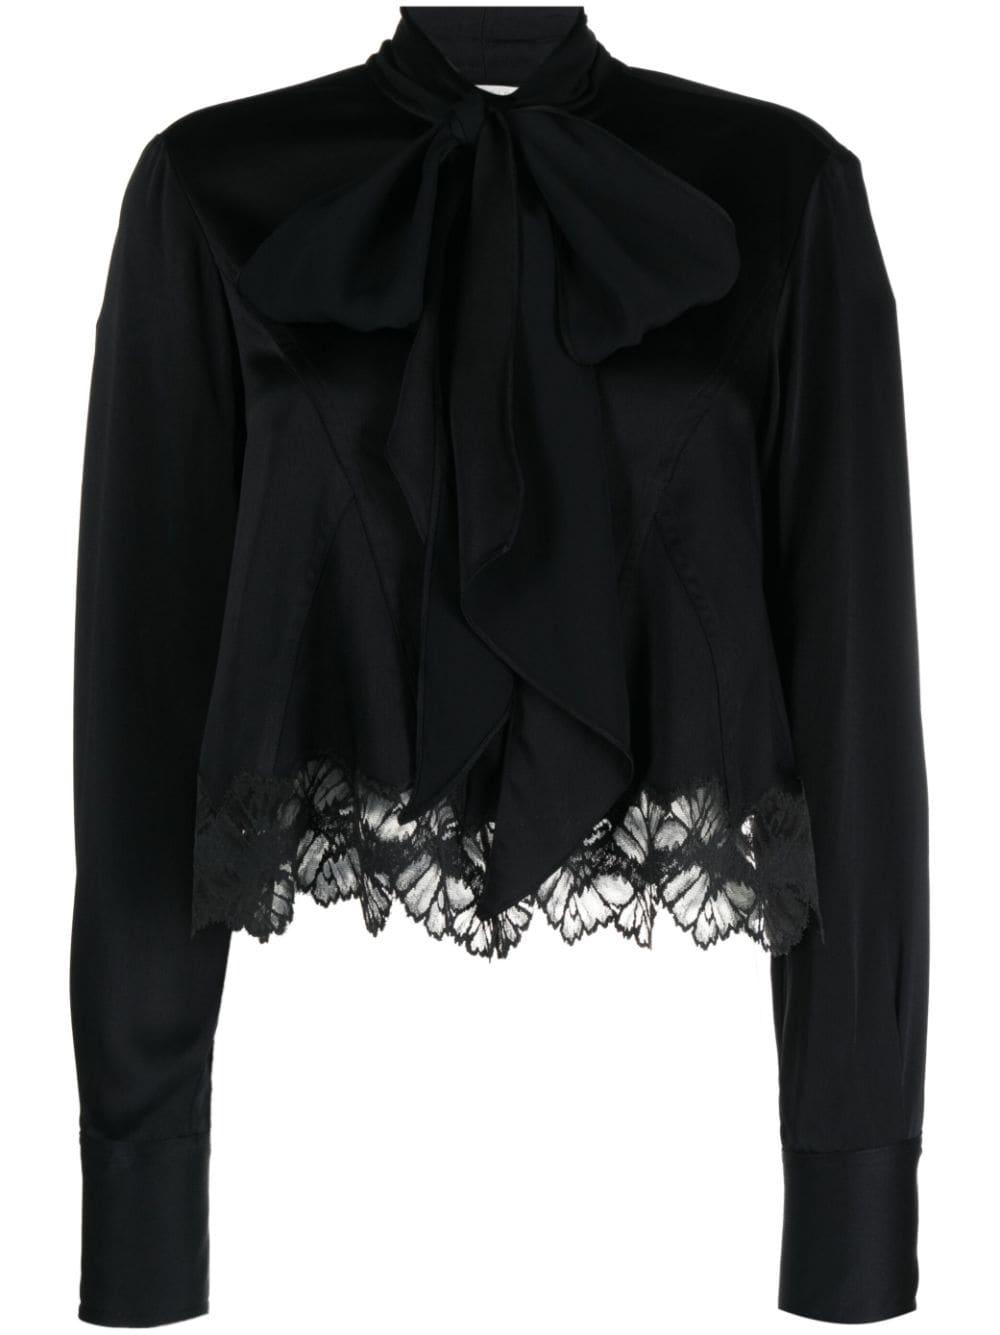 Stella McCartney Pussy-bow Lace-trim Blouse in Black | Lyst